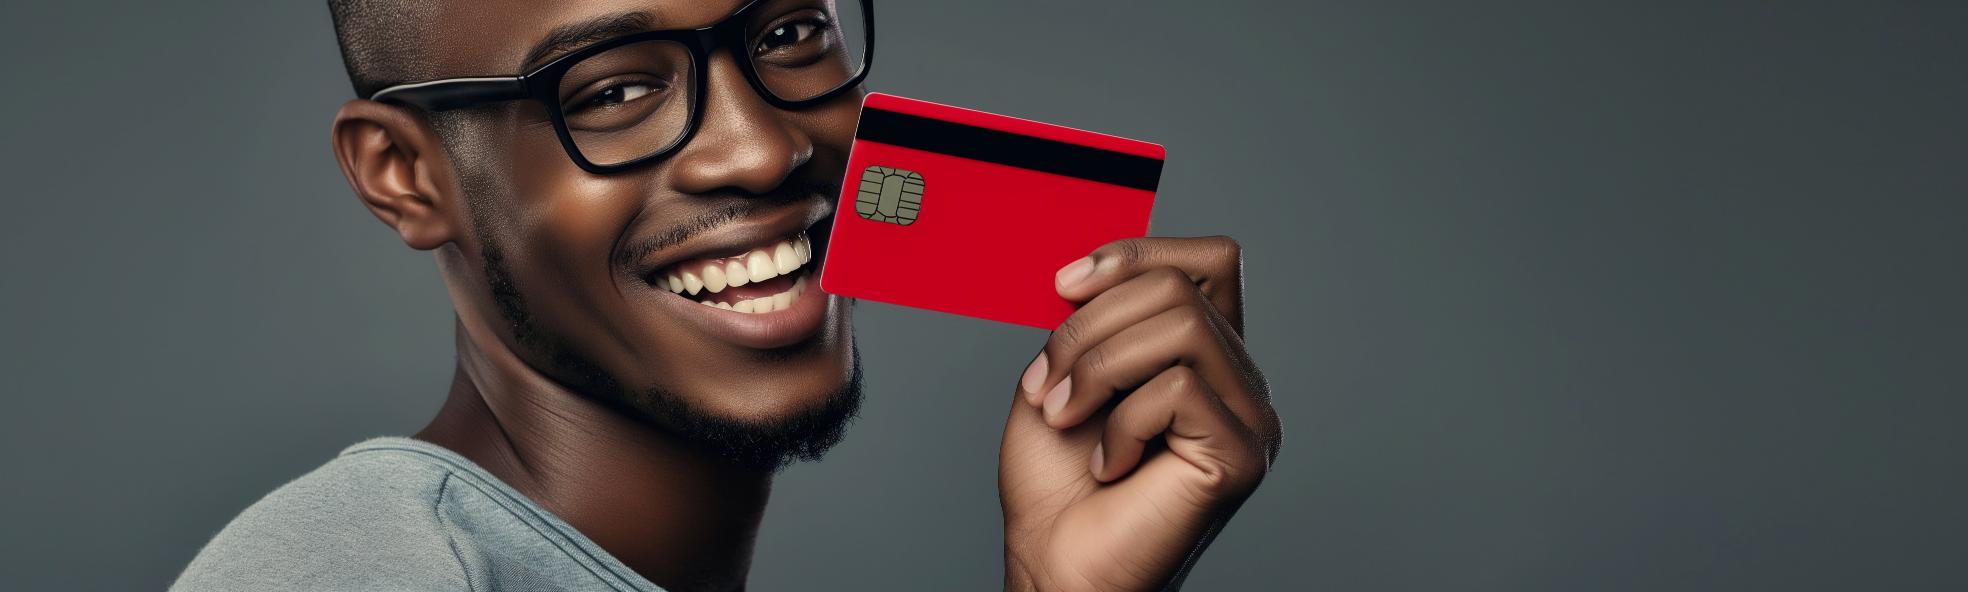 Black man holding a red Payment card